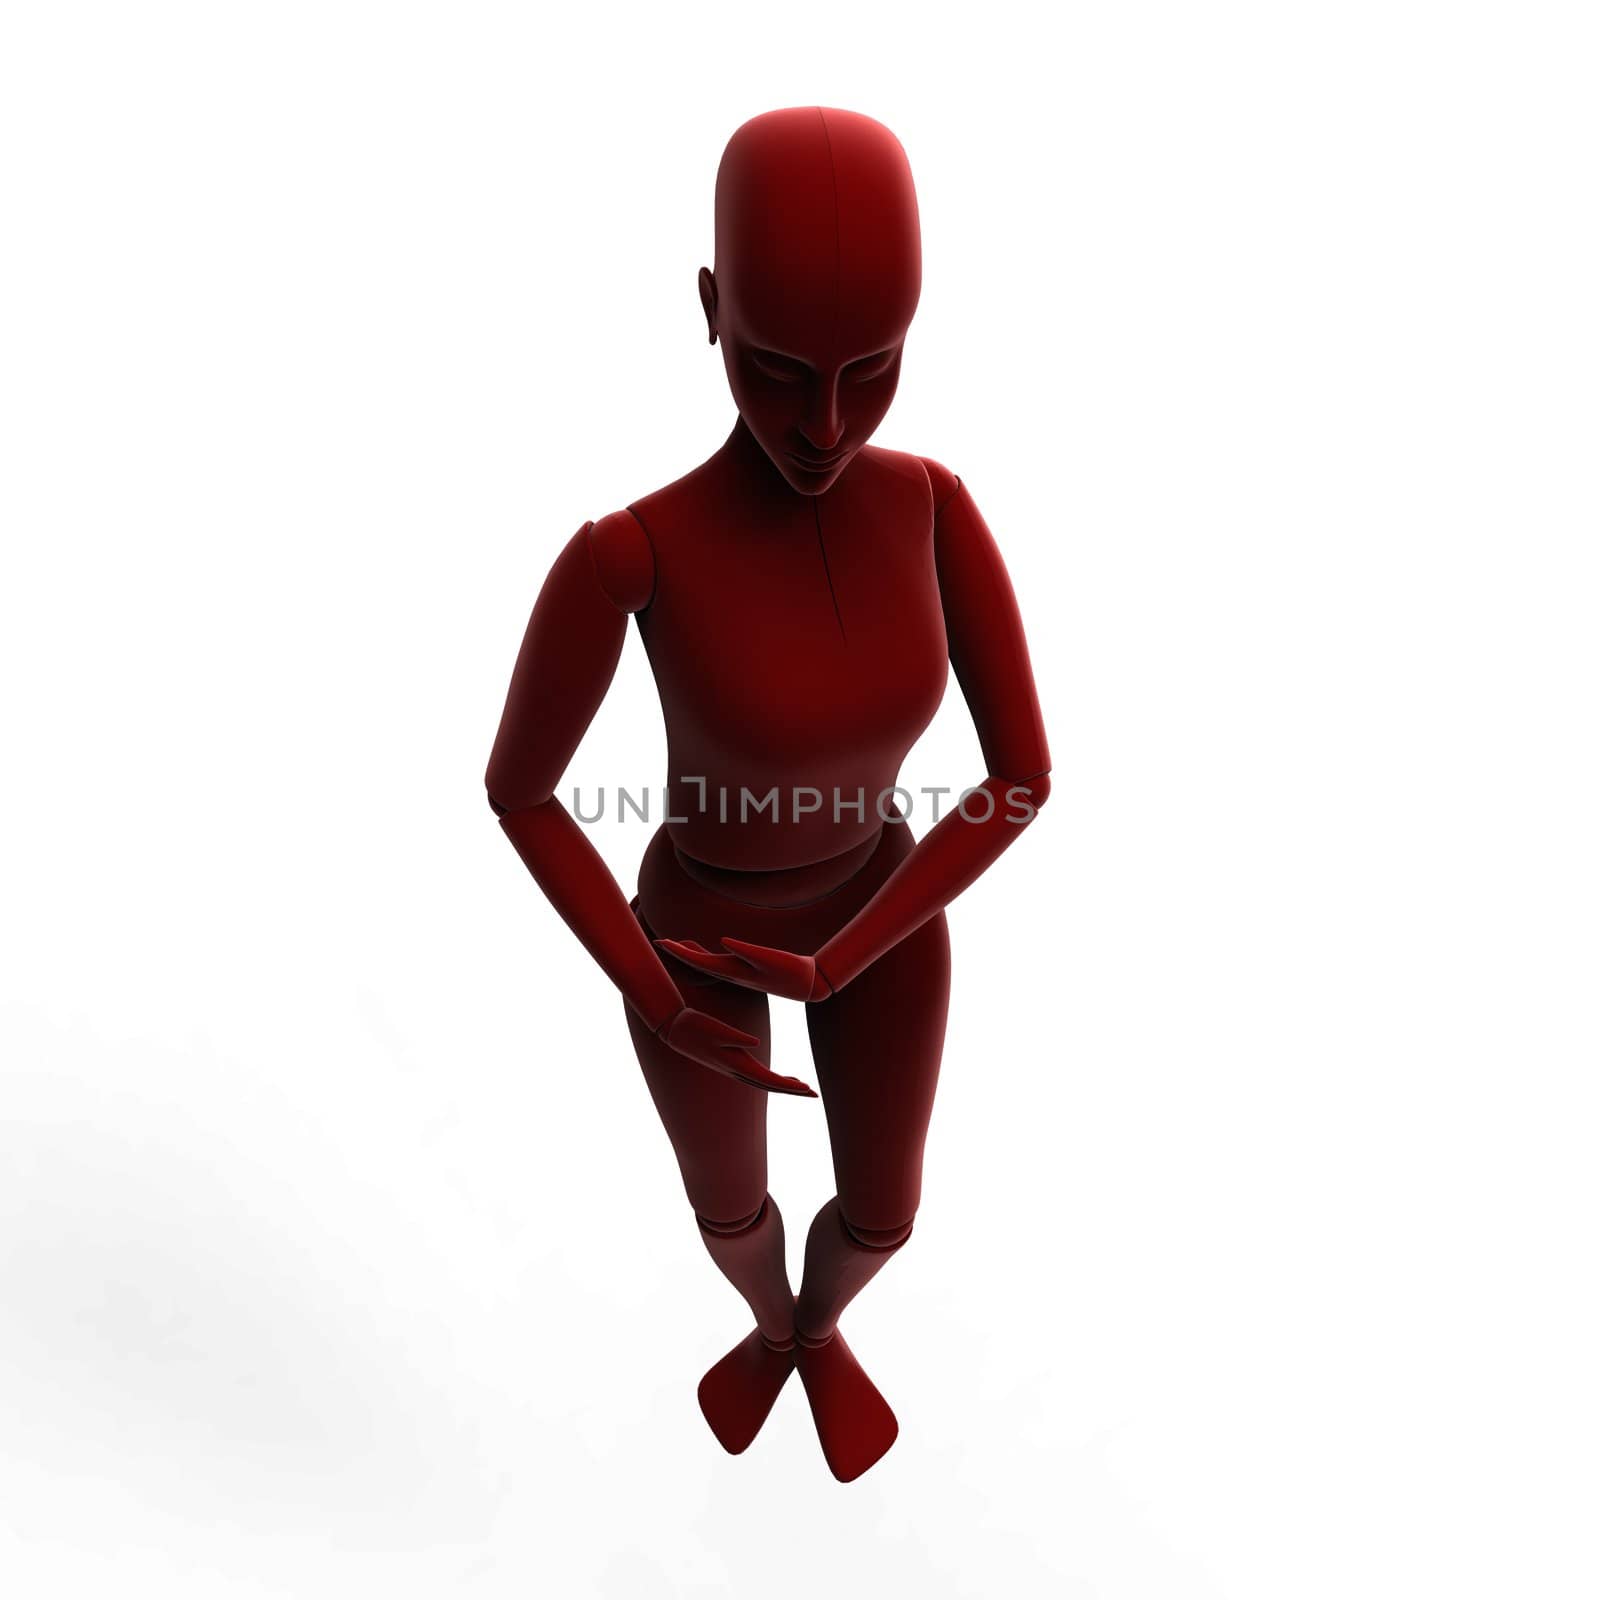  Female Mannequin Isolated On white background by totuss